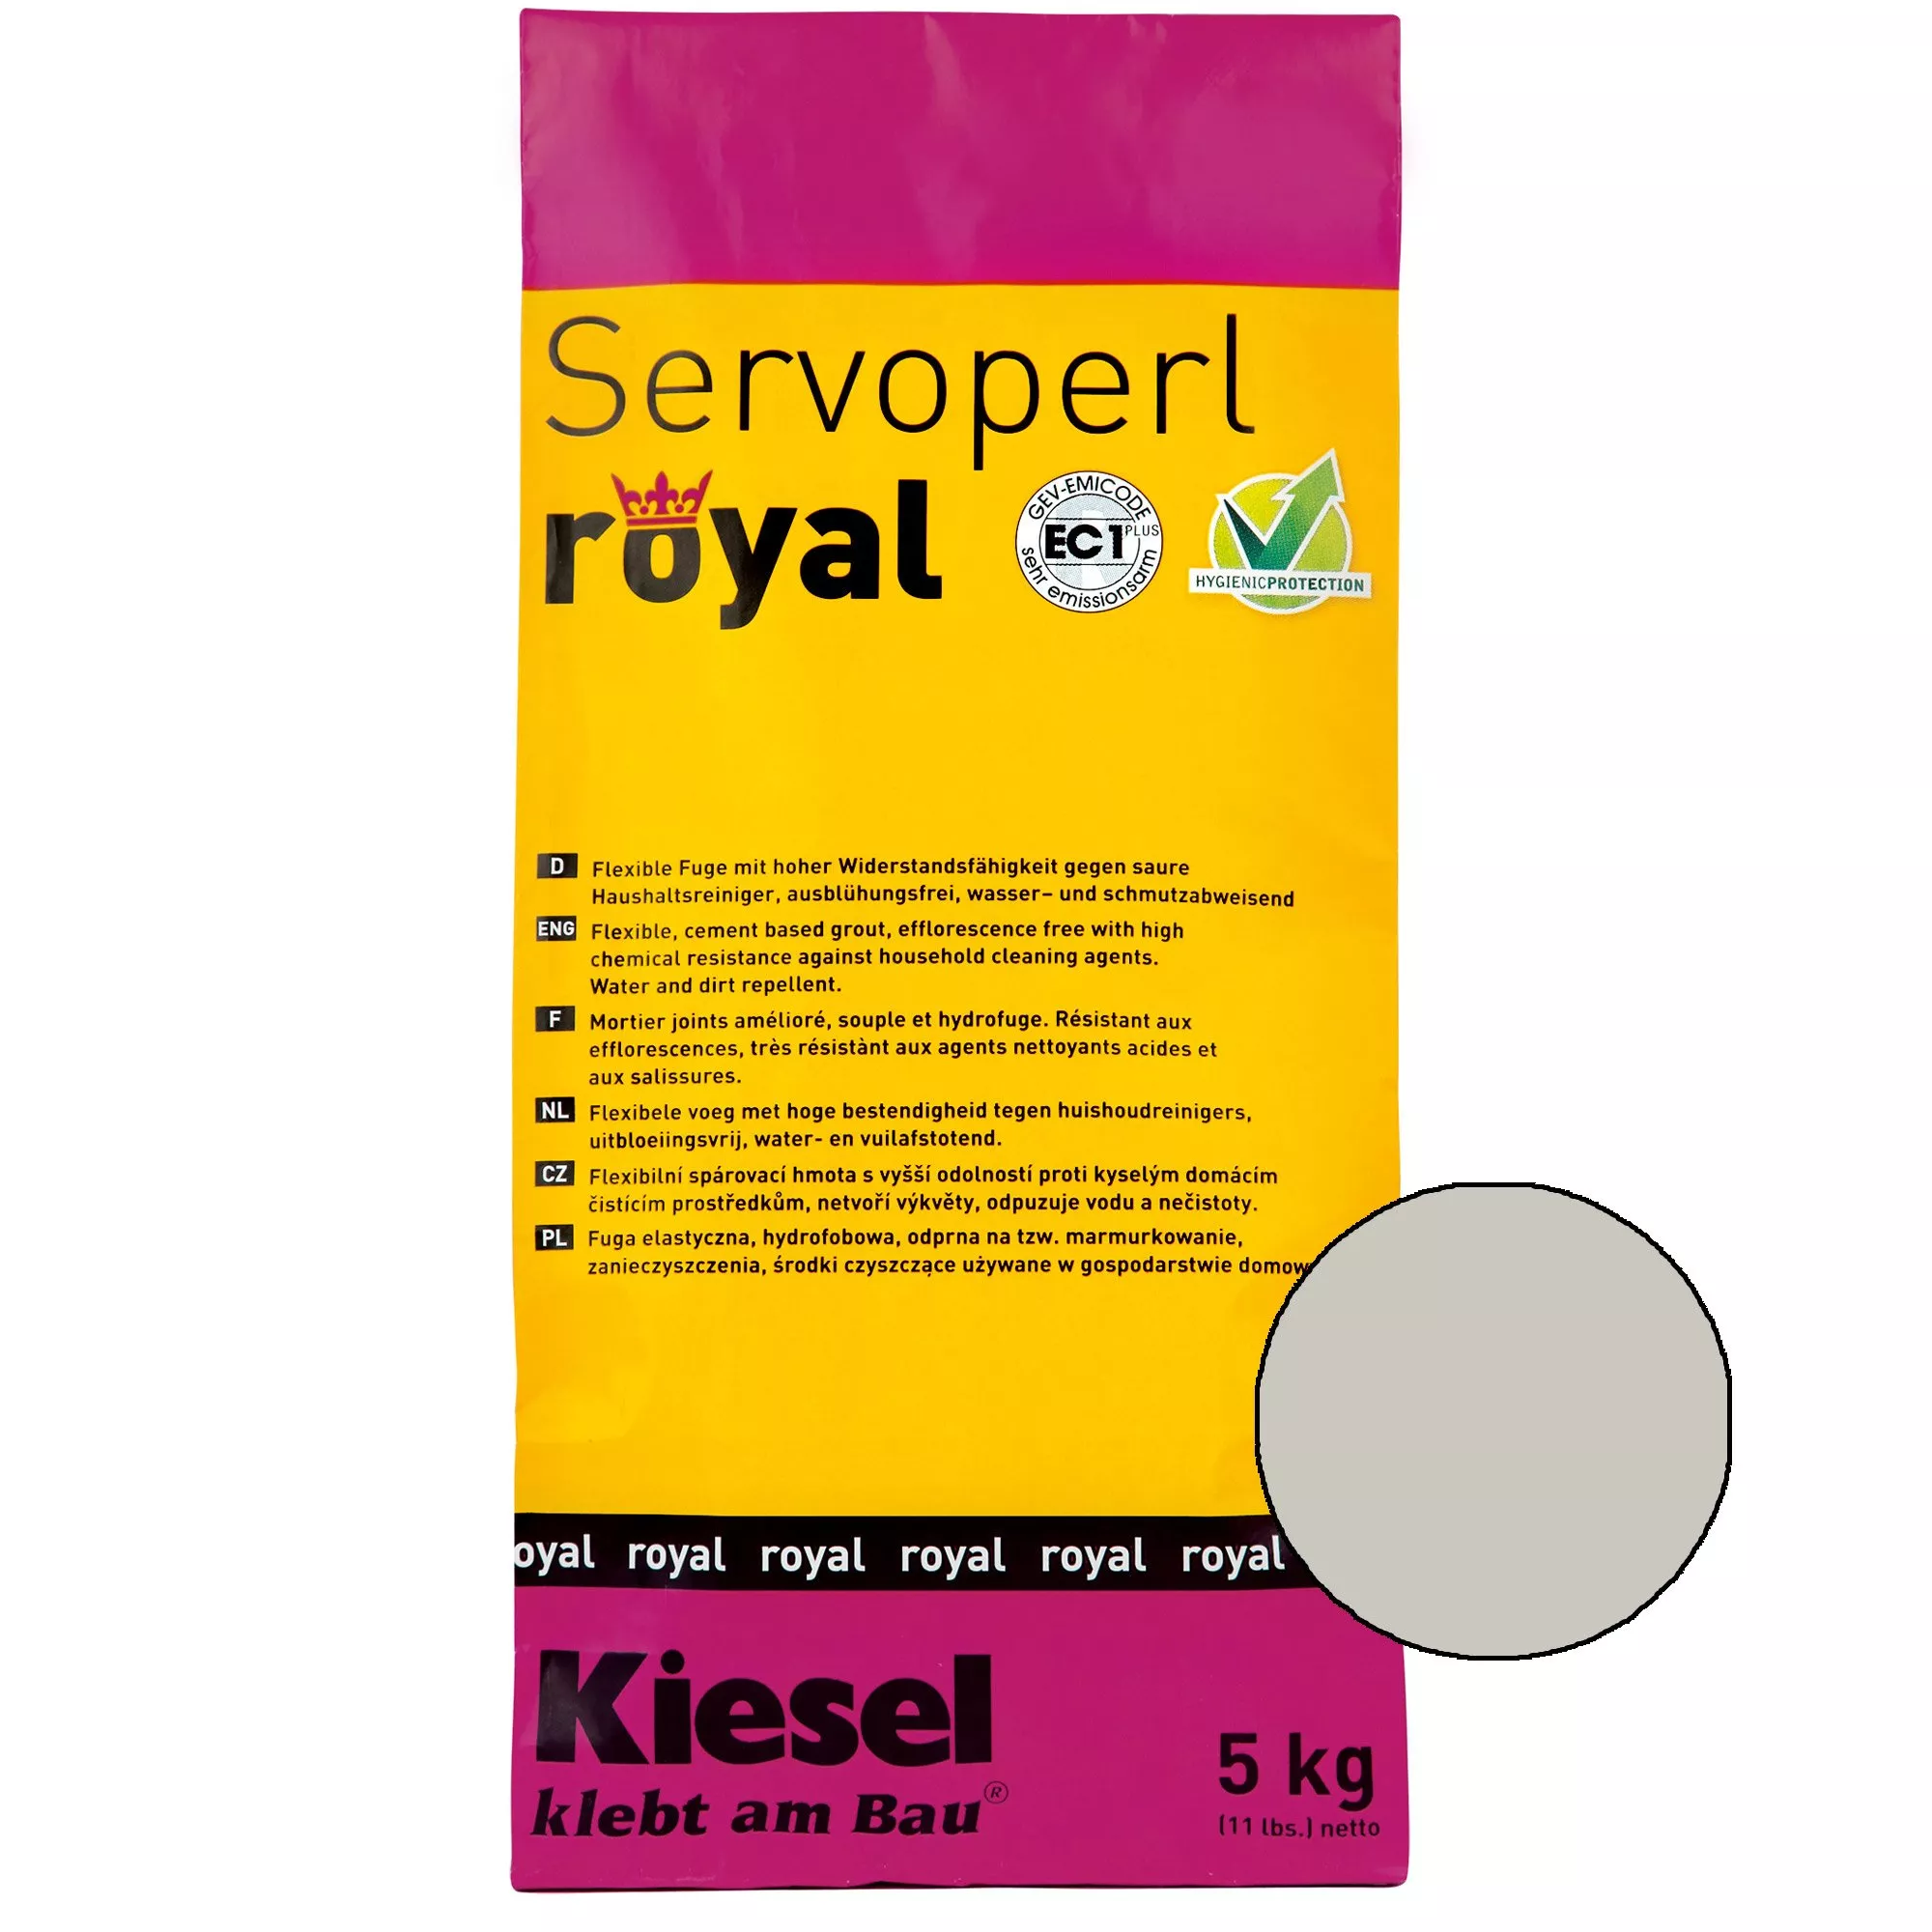 Kiesel Servoperl royal - Flexible, water- and dirt-repellent joint (5KG silver-grey)